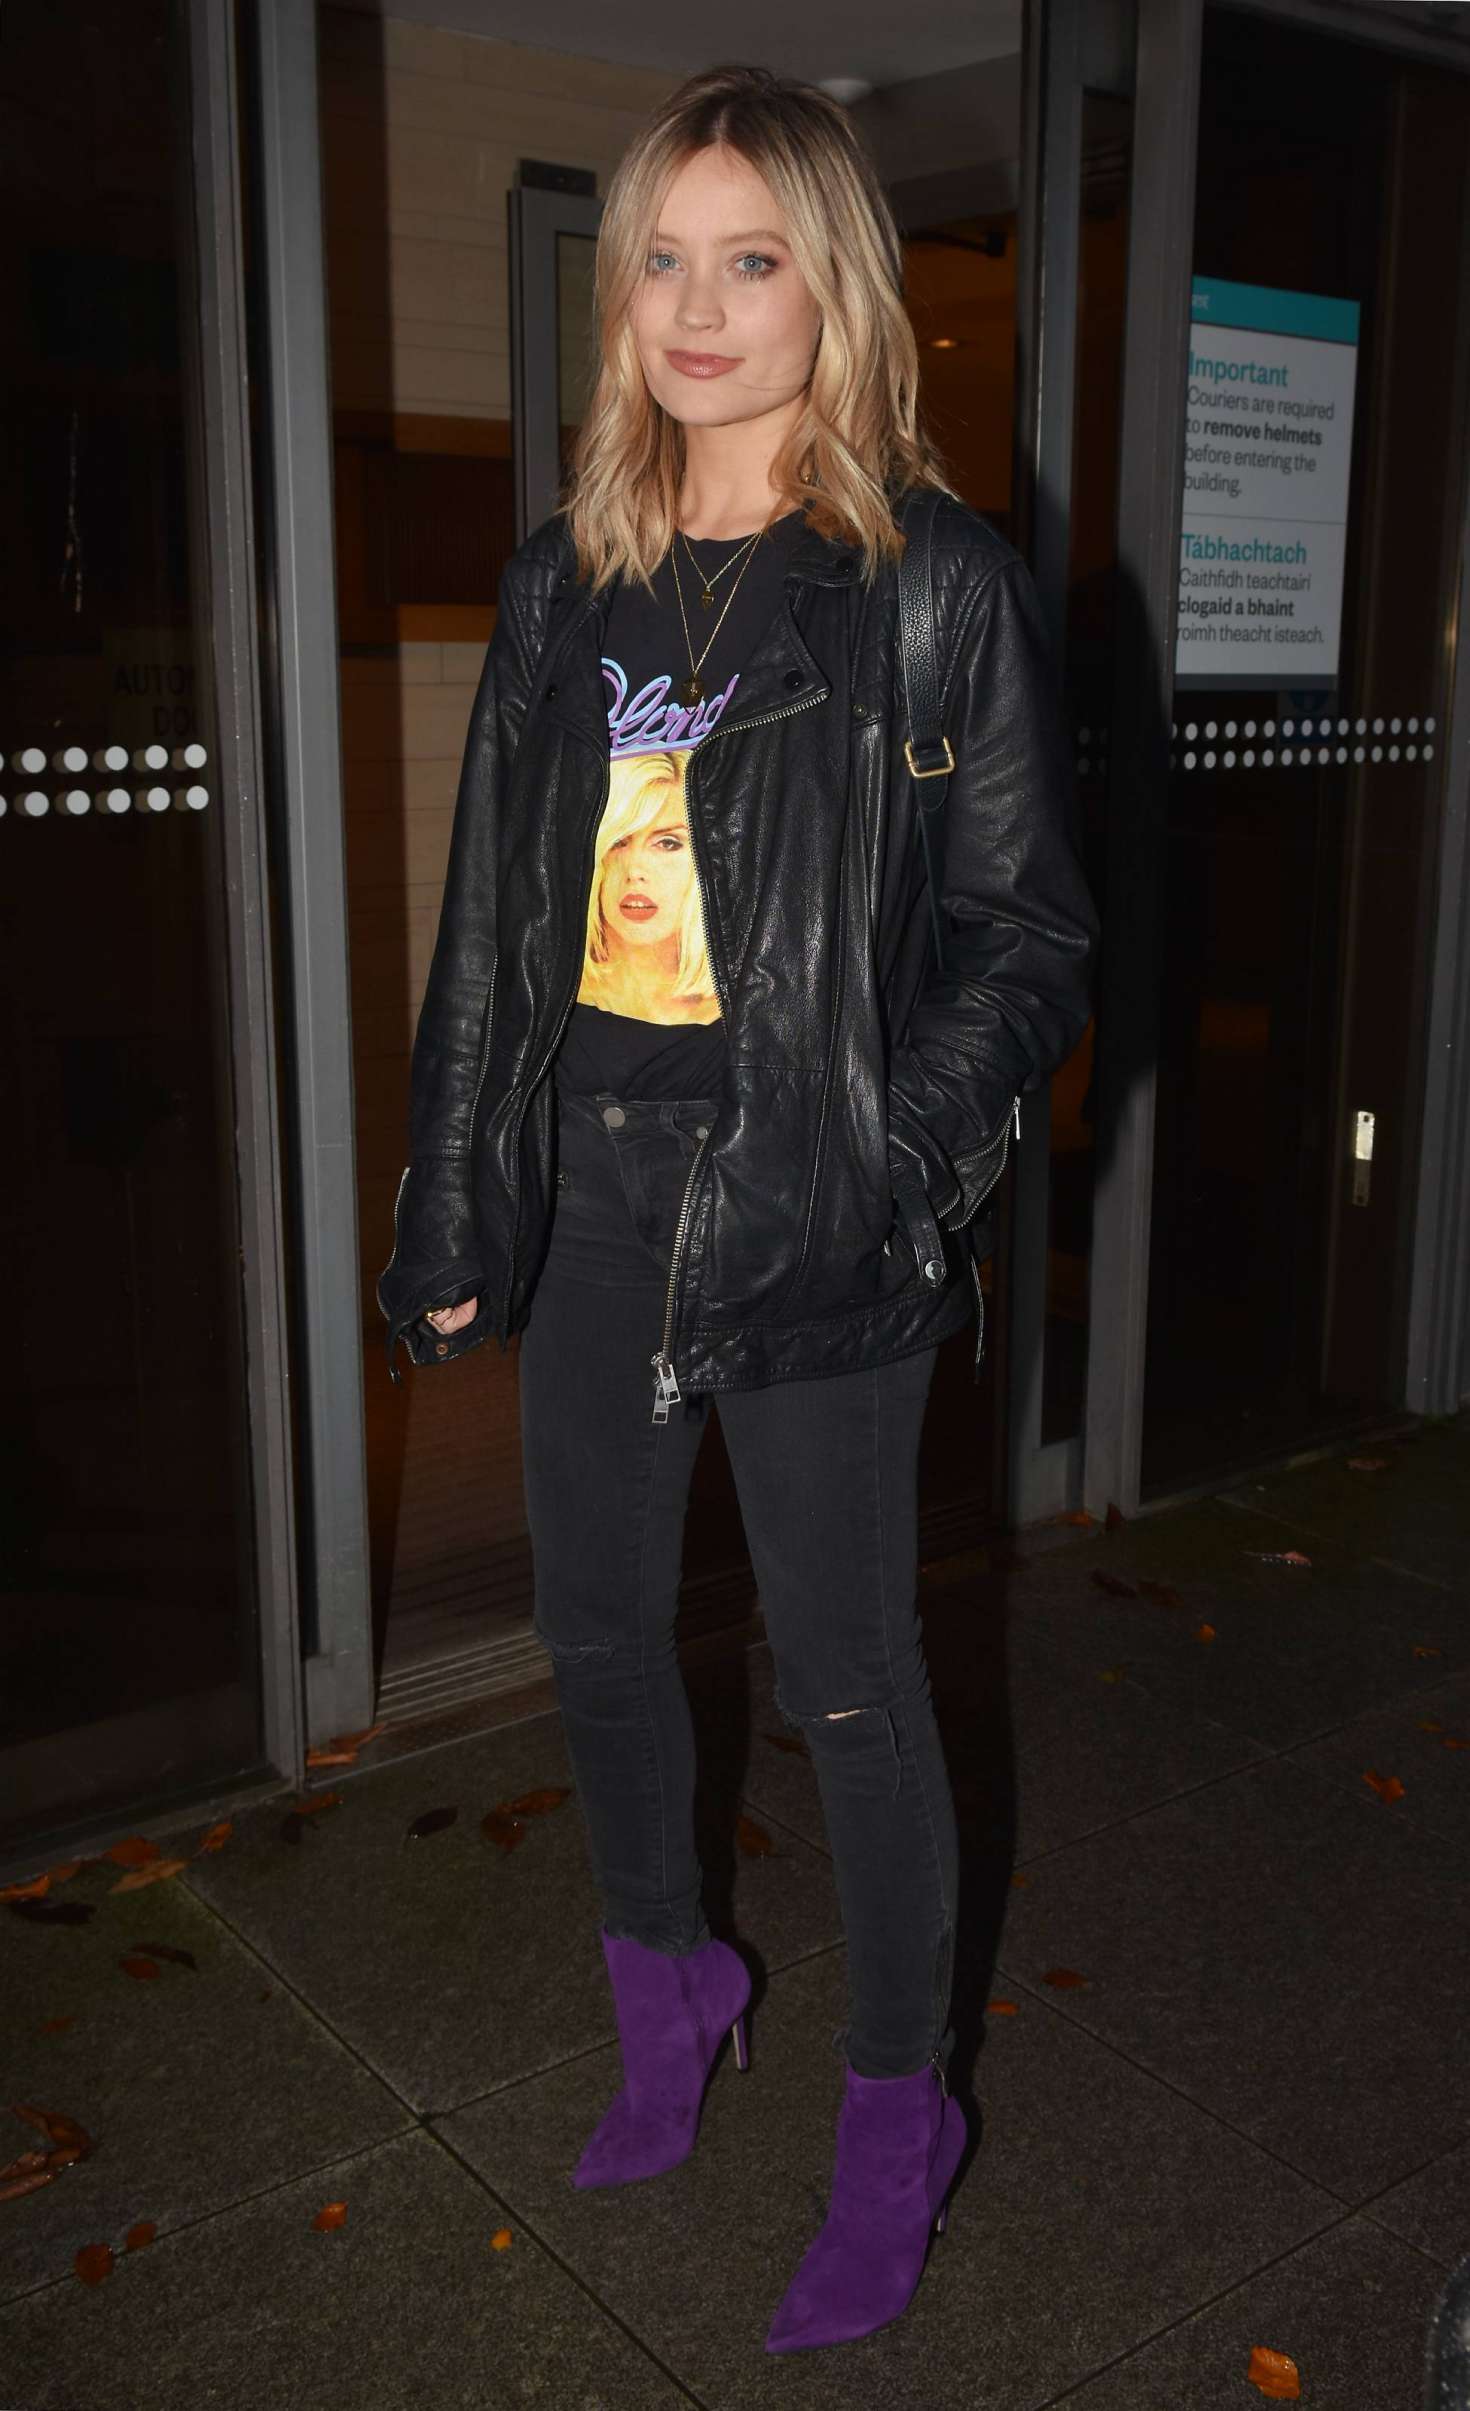 Laura Whitmore â€“ Eoghan McDermott Show & Ray Darcy Show in Dublin